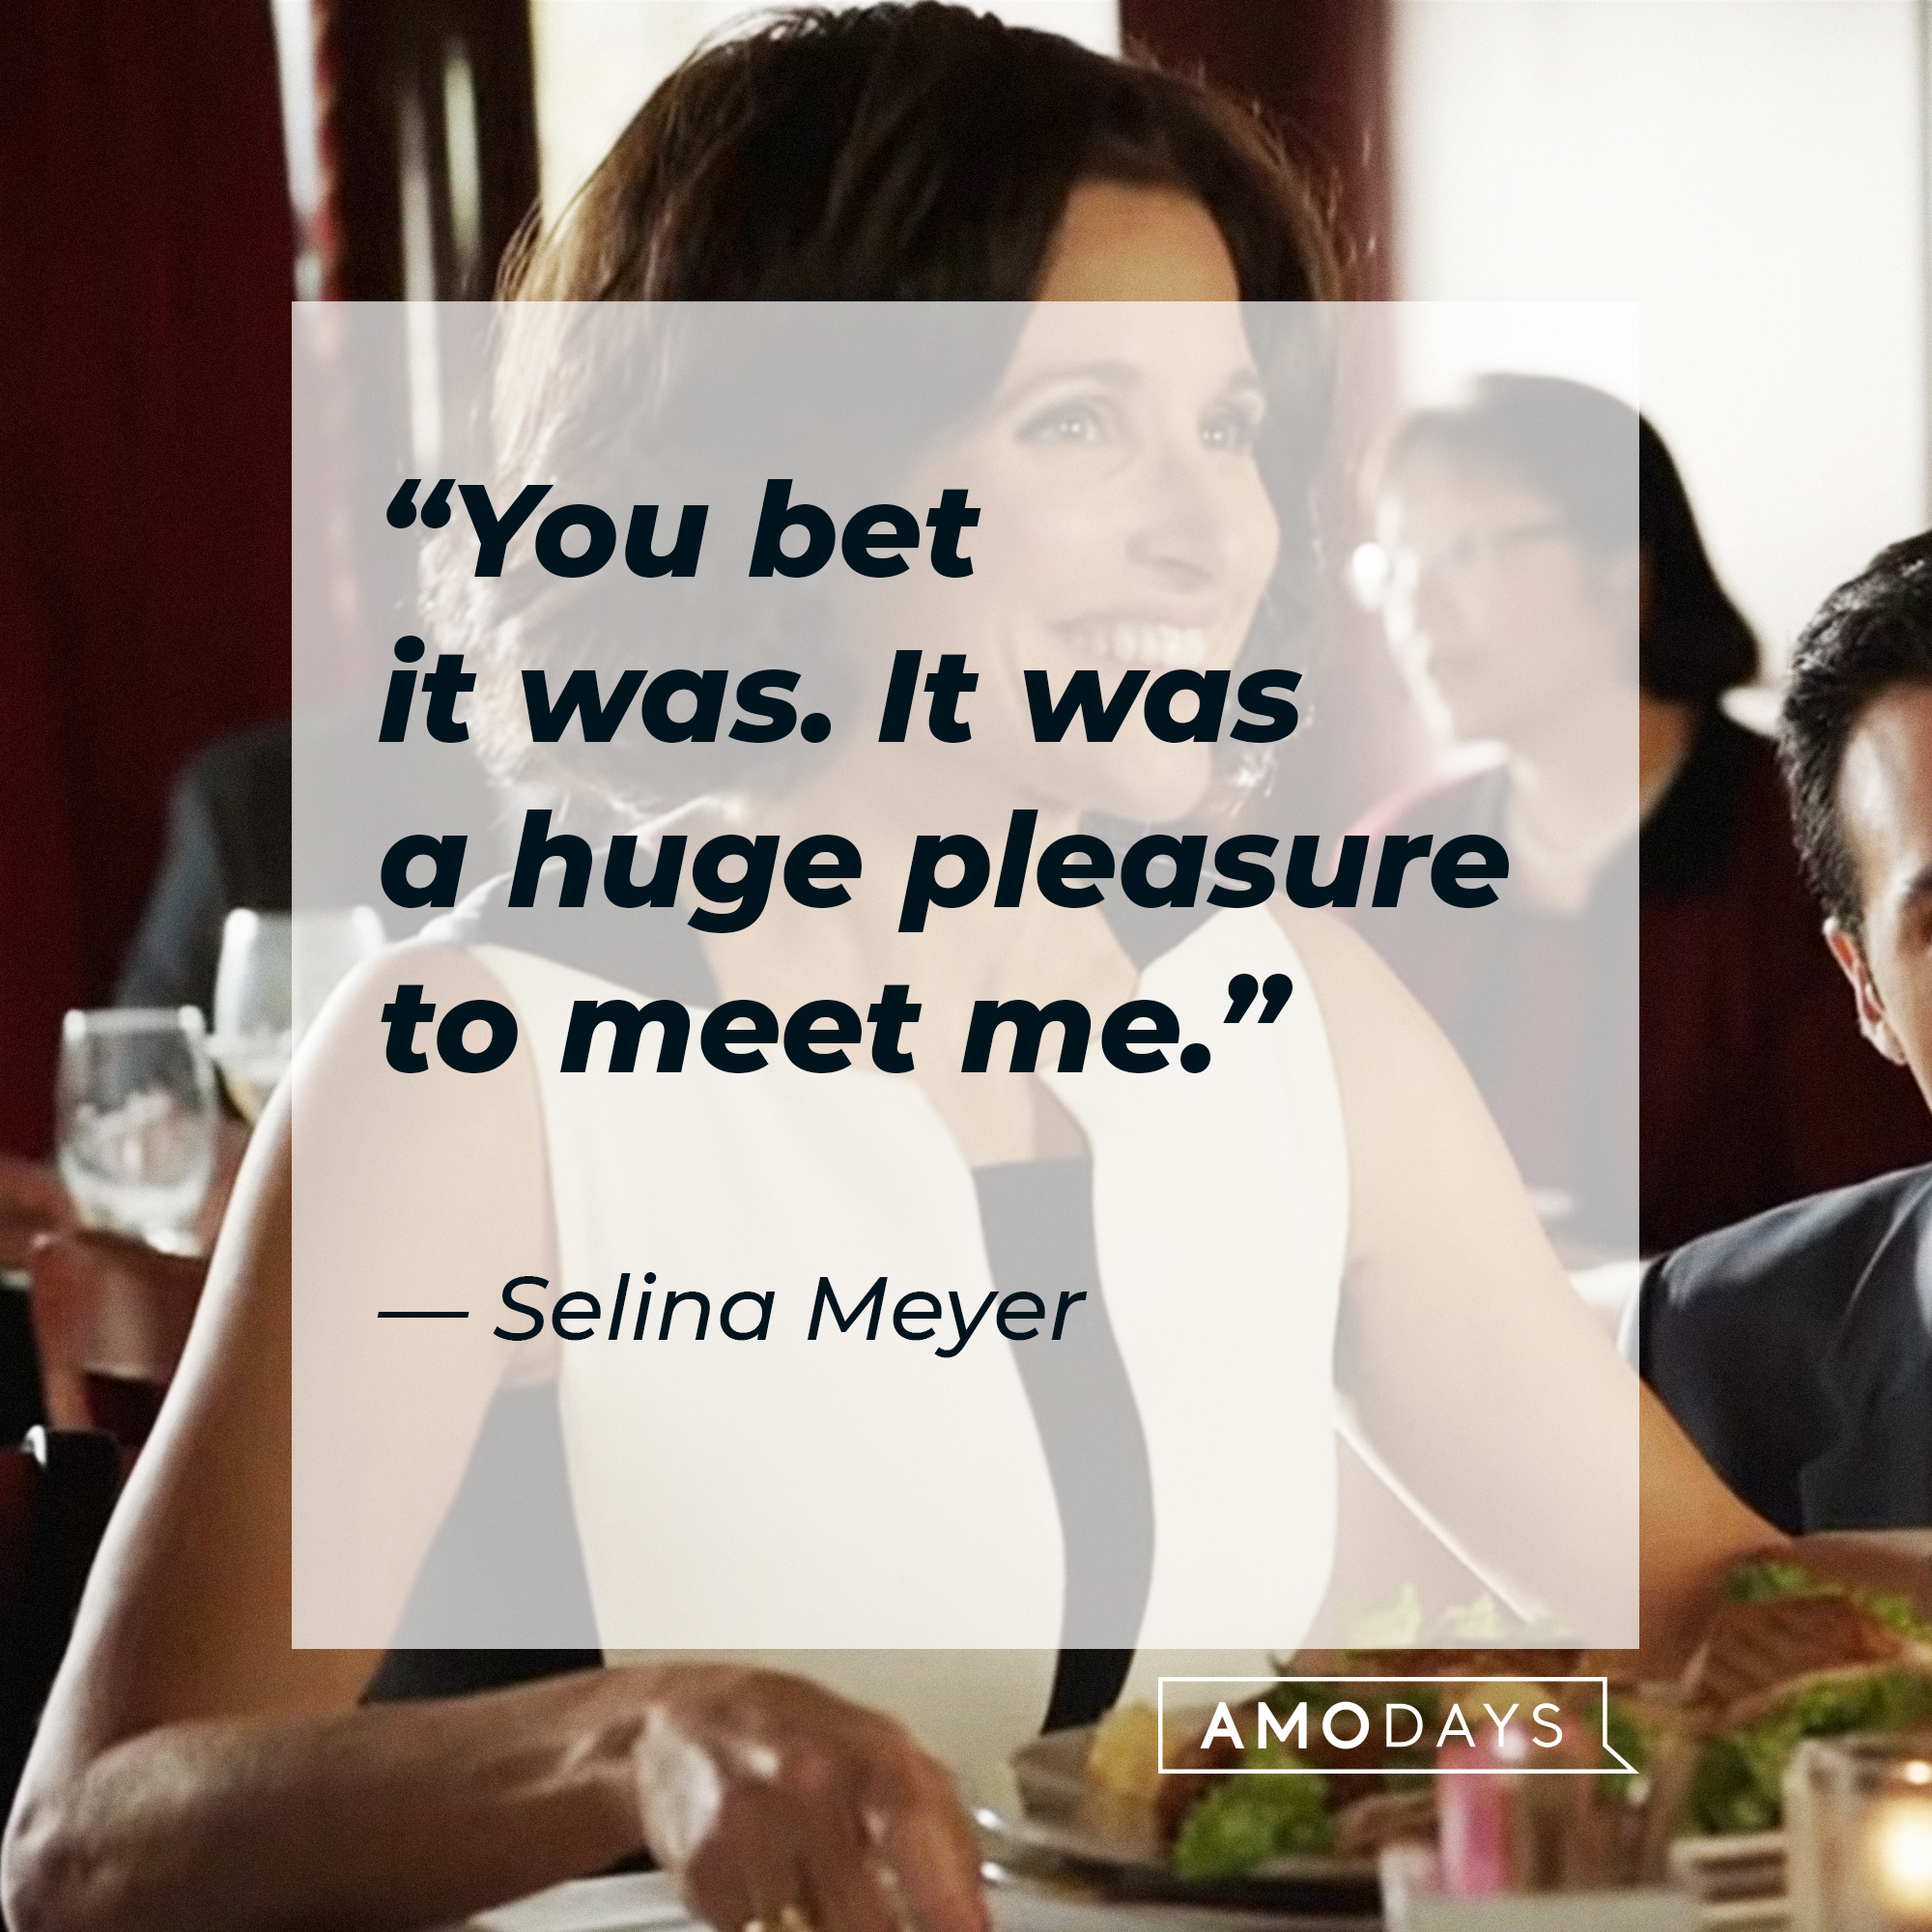 Selina Meyer, with her quote: “You bet it was. It was a huge pleasure to meet me.” │Source: youtube.com / Max